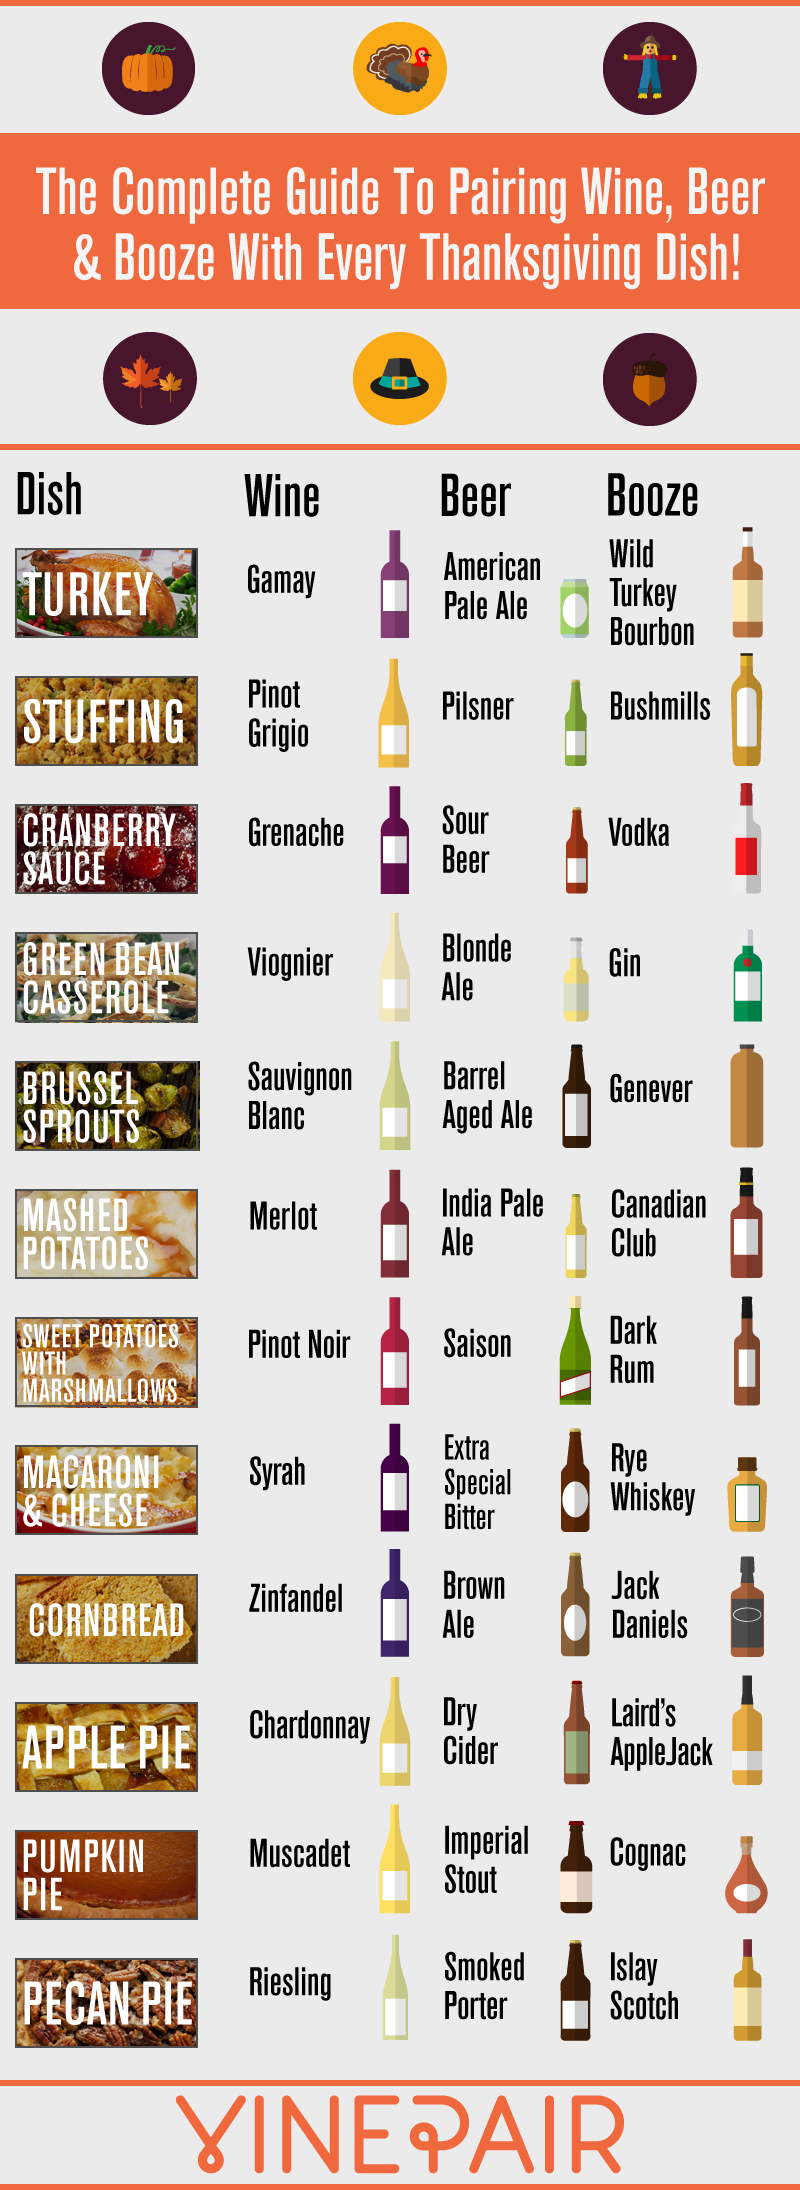 The Complete Guide To Pairing Wine, Beer And Booze With Every Thanksgiving Dish